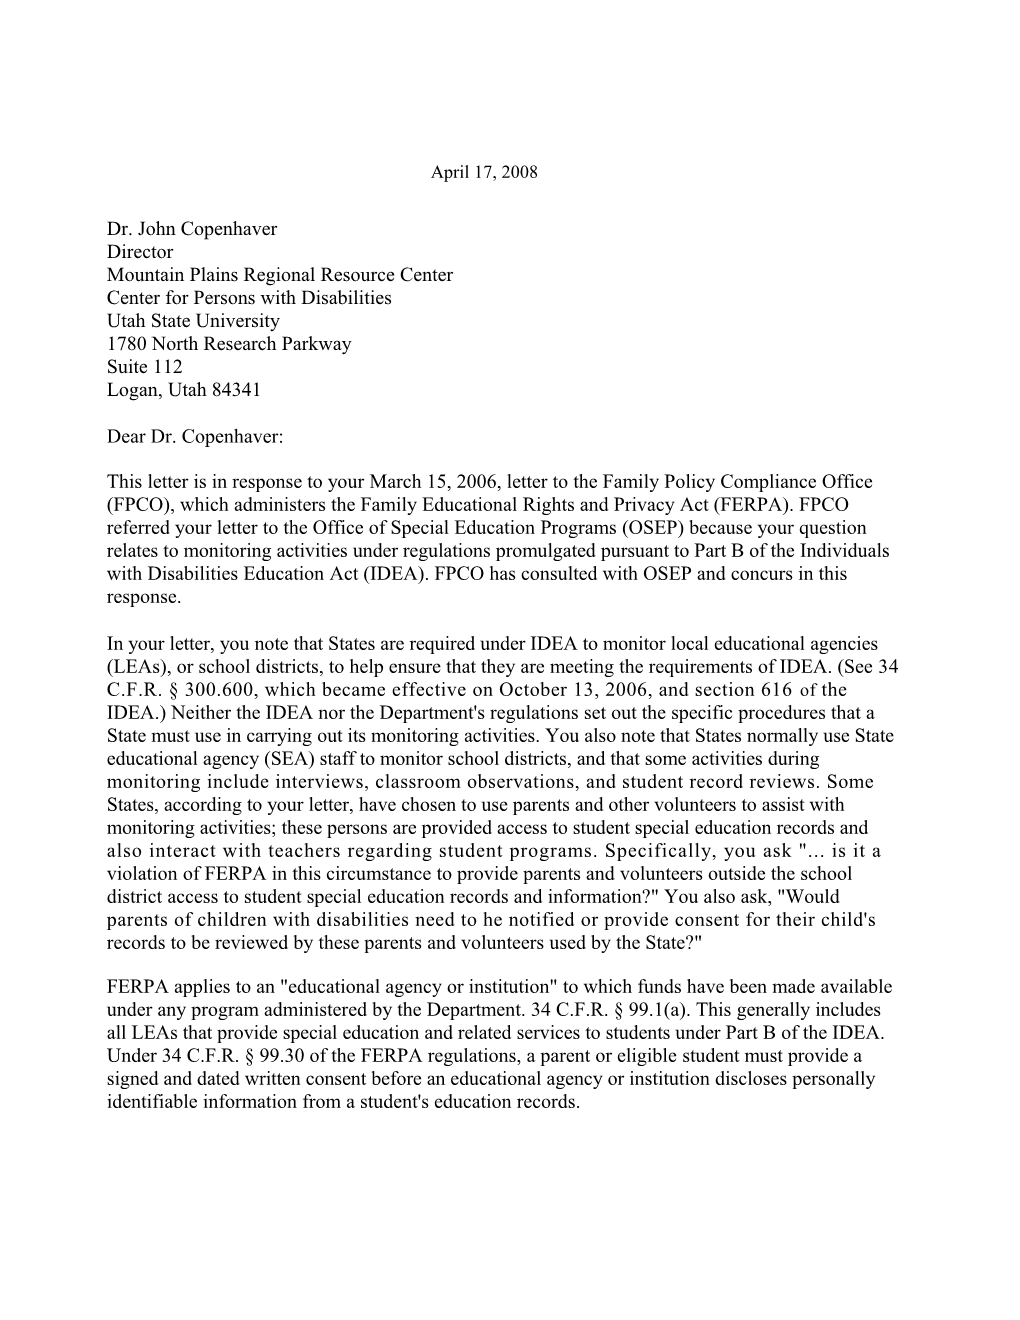 Copenhaver Letter Dated 04/17/08 Re: Confidentiality of Information (MS Word)